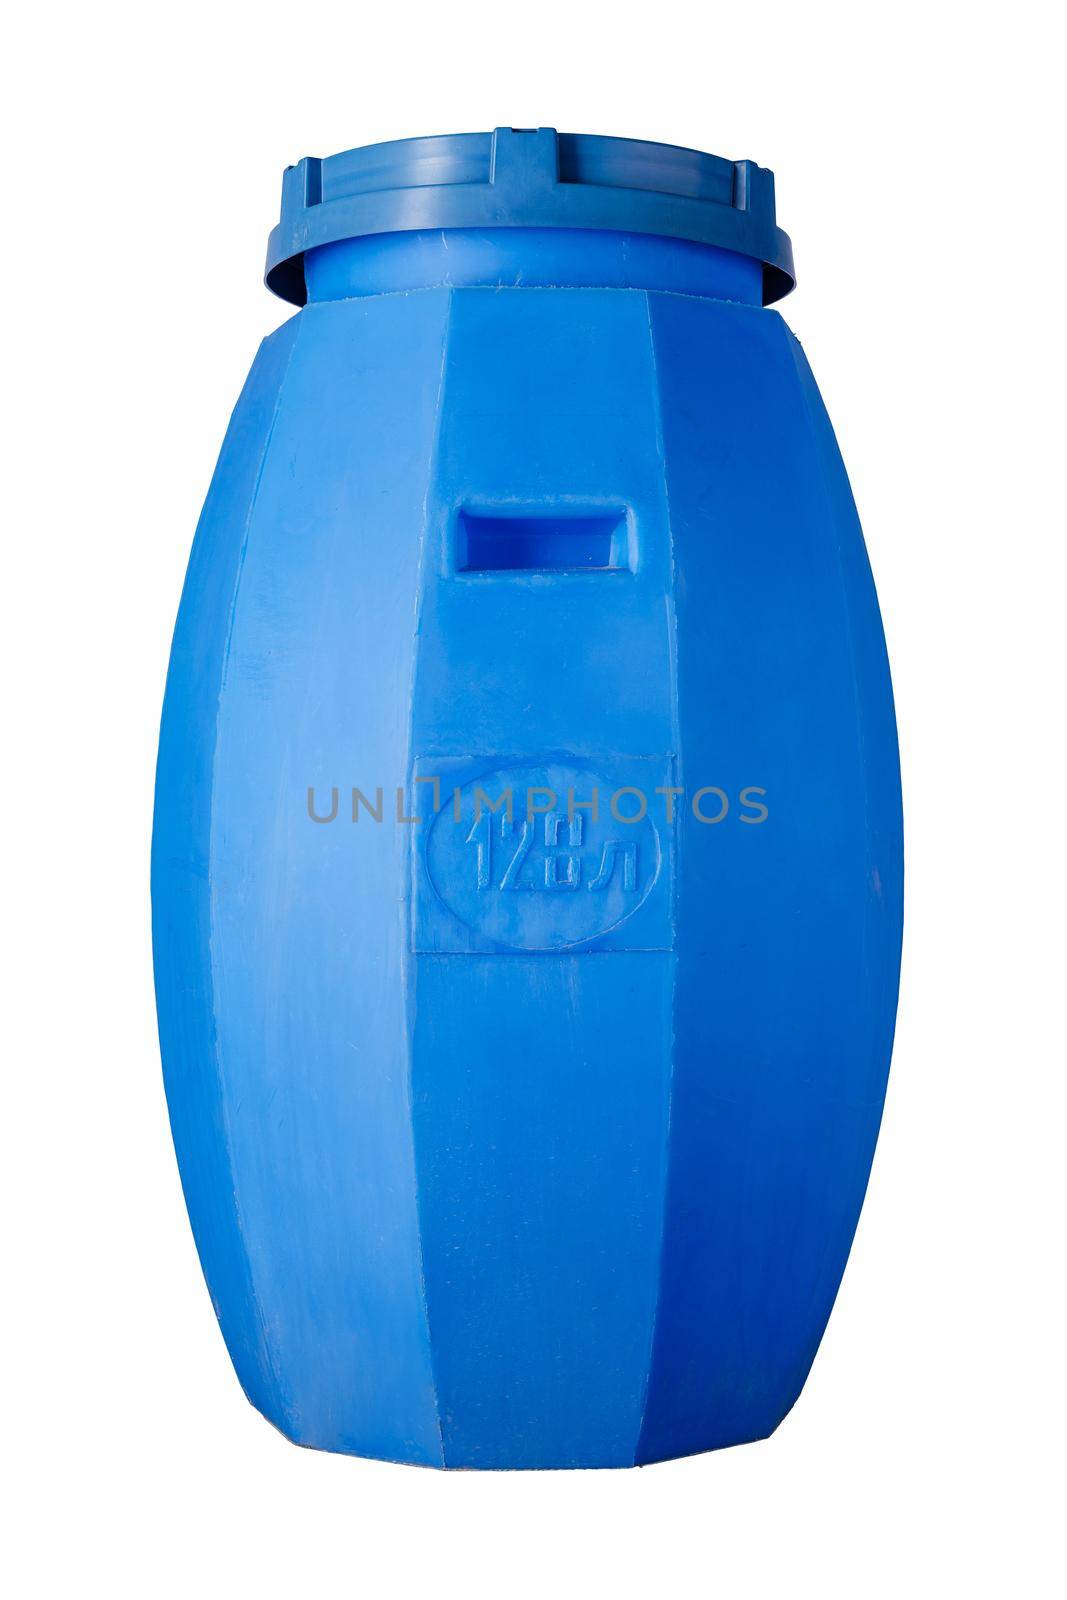 Blue plastic water tank isolated on white background